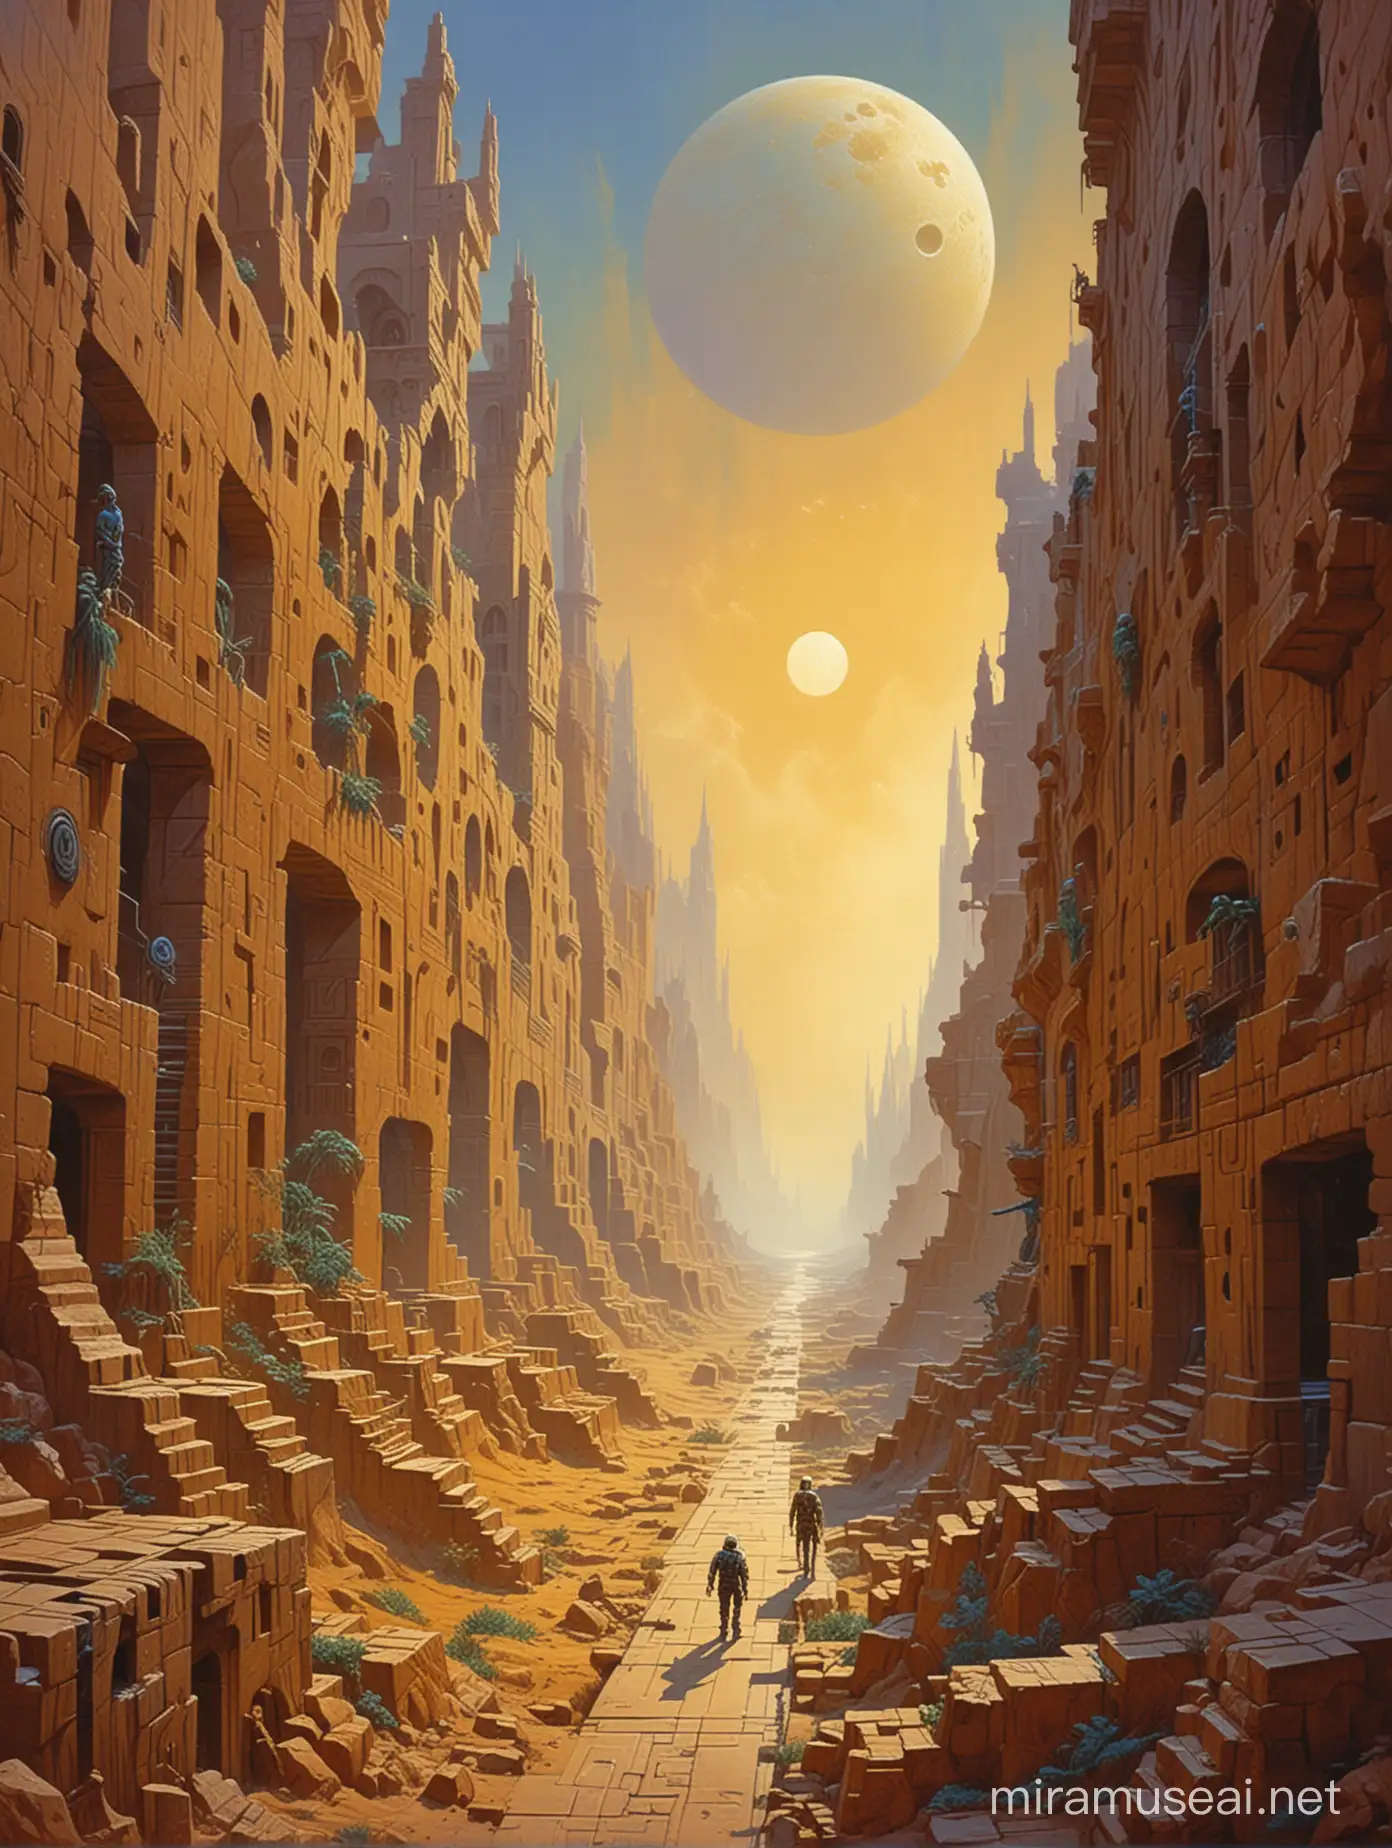 Highly detailed painting closely based on ((('Man in the Maze' by Bruce Pennington))), a spacecraft glides over a complex maze of concrete passages, the Moon is hazy hangs low in the yellow sky, use muted pastel colors only, high quality